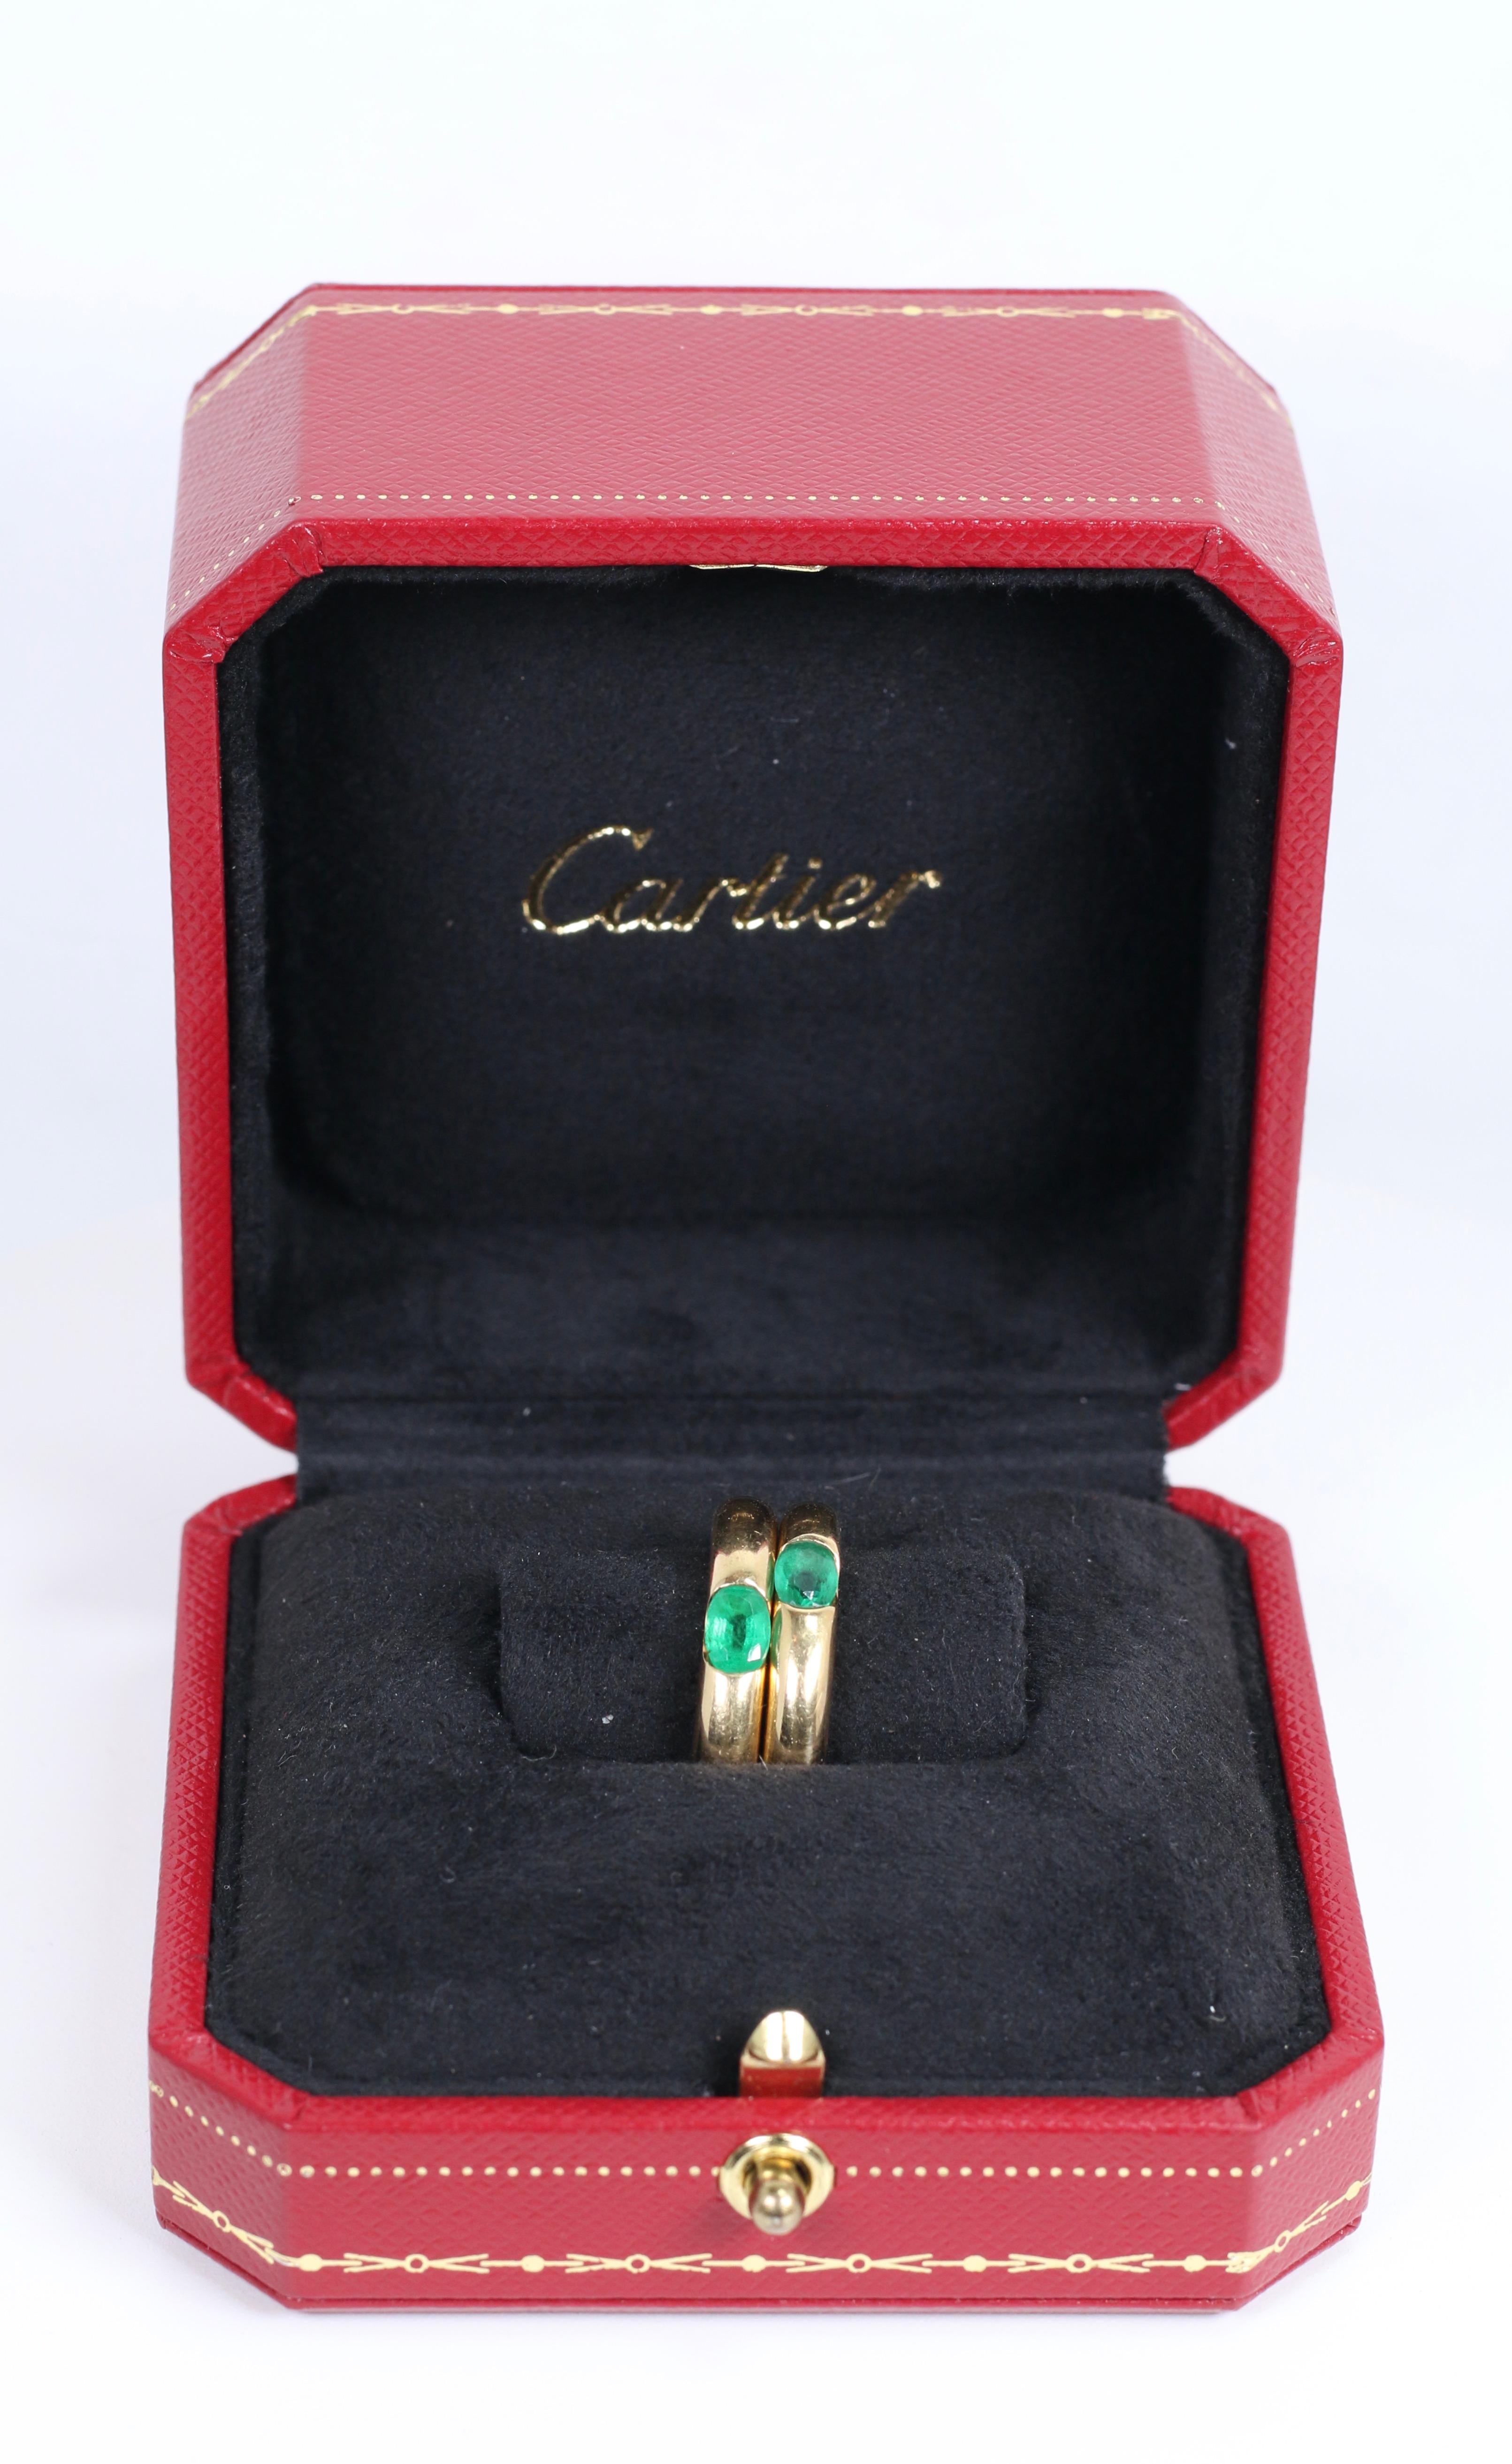 Pair of Cartier Yellow Gold Bands with Single Emeralds with Box and Papers. Size 7.25